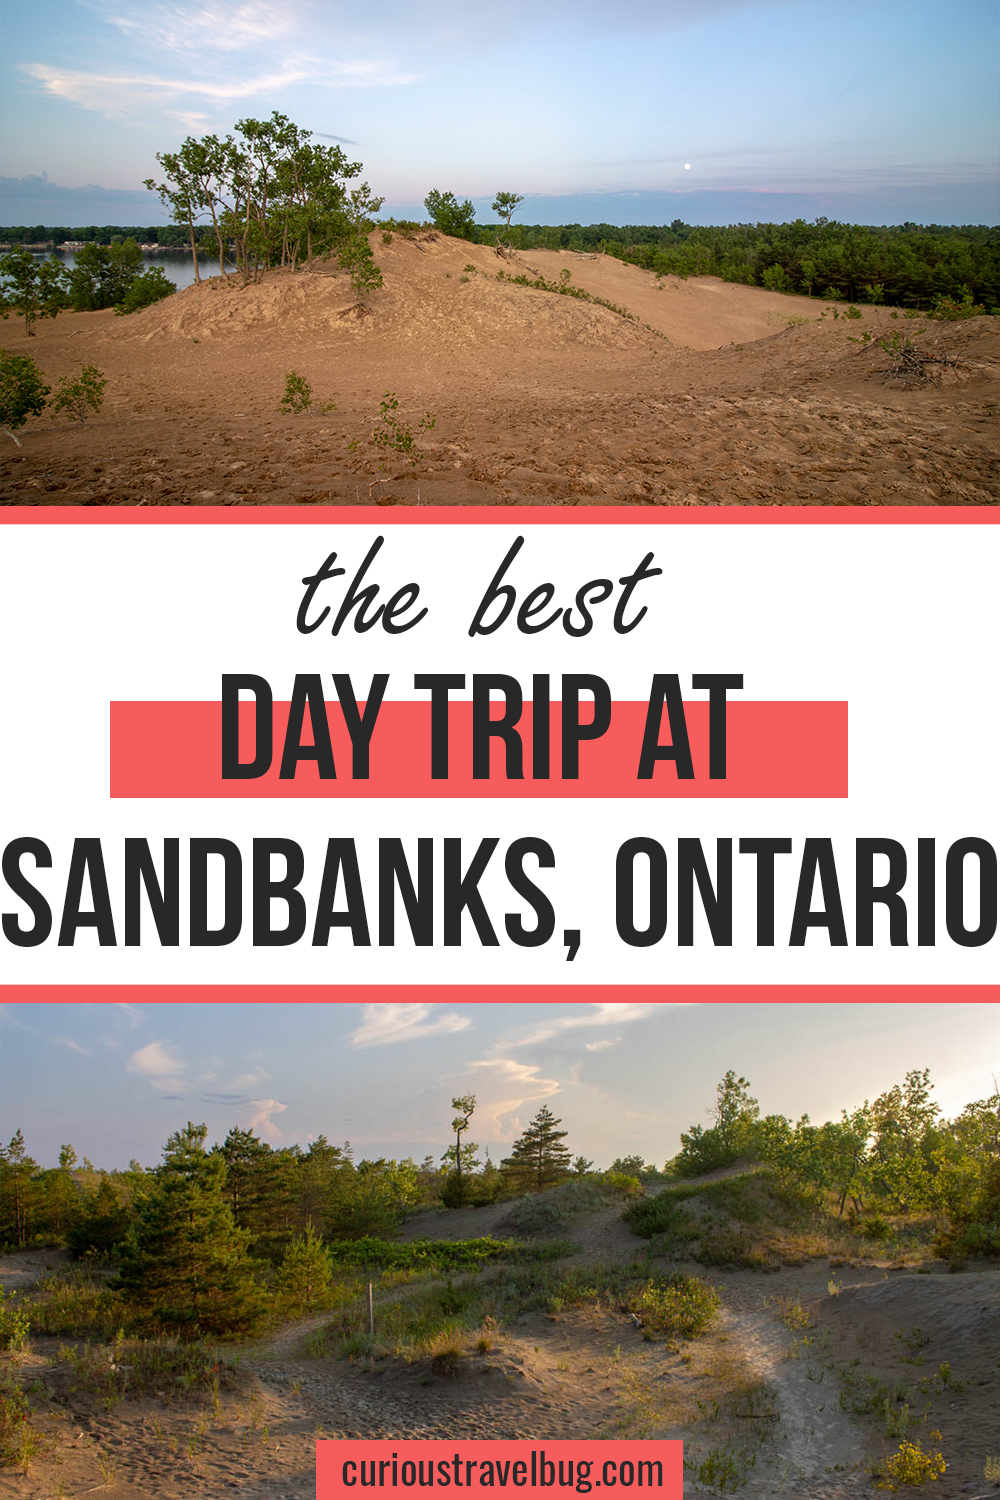 Day trip to Sandbanks Provincial Park in Prince Edward County, Ontario with this full guide that includes the best things to do including a scenic drive and when the best time to visit the park is. The dunes here are great for a hike and are one of Canada's beautiful sights. It's perfect for a day trip from Toronto, Ottawa, or Kingston.